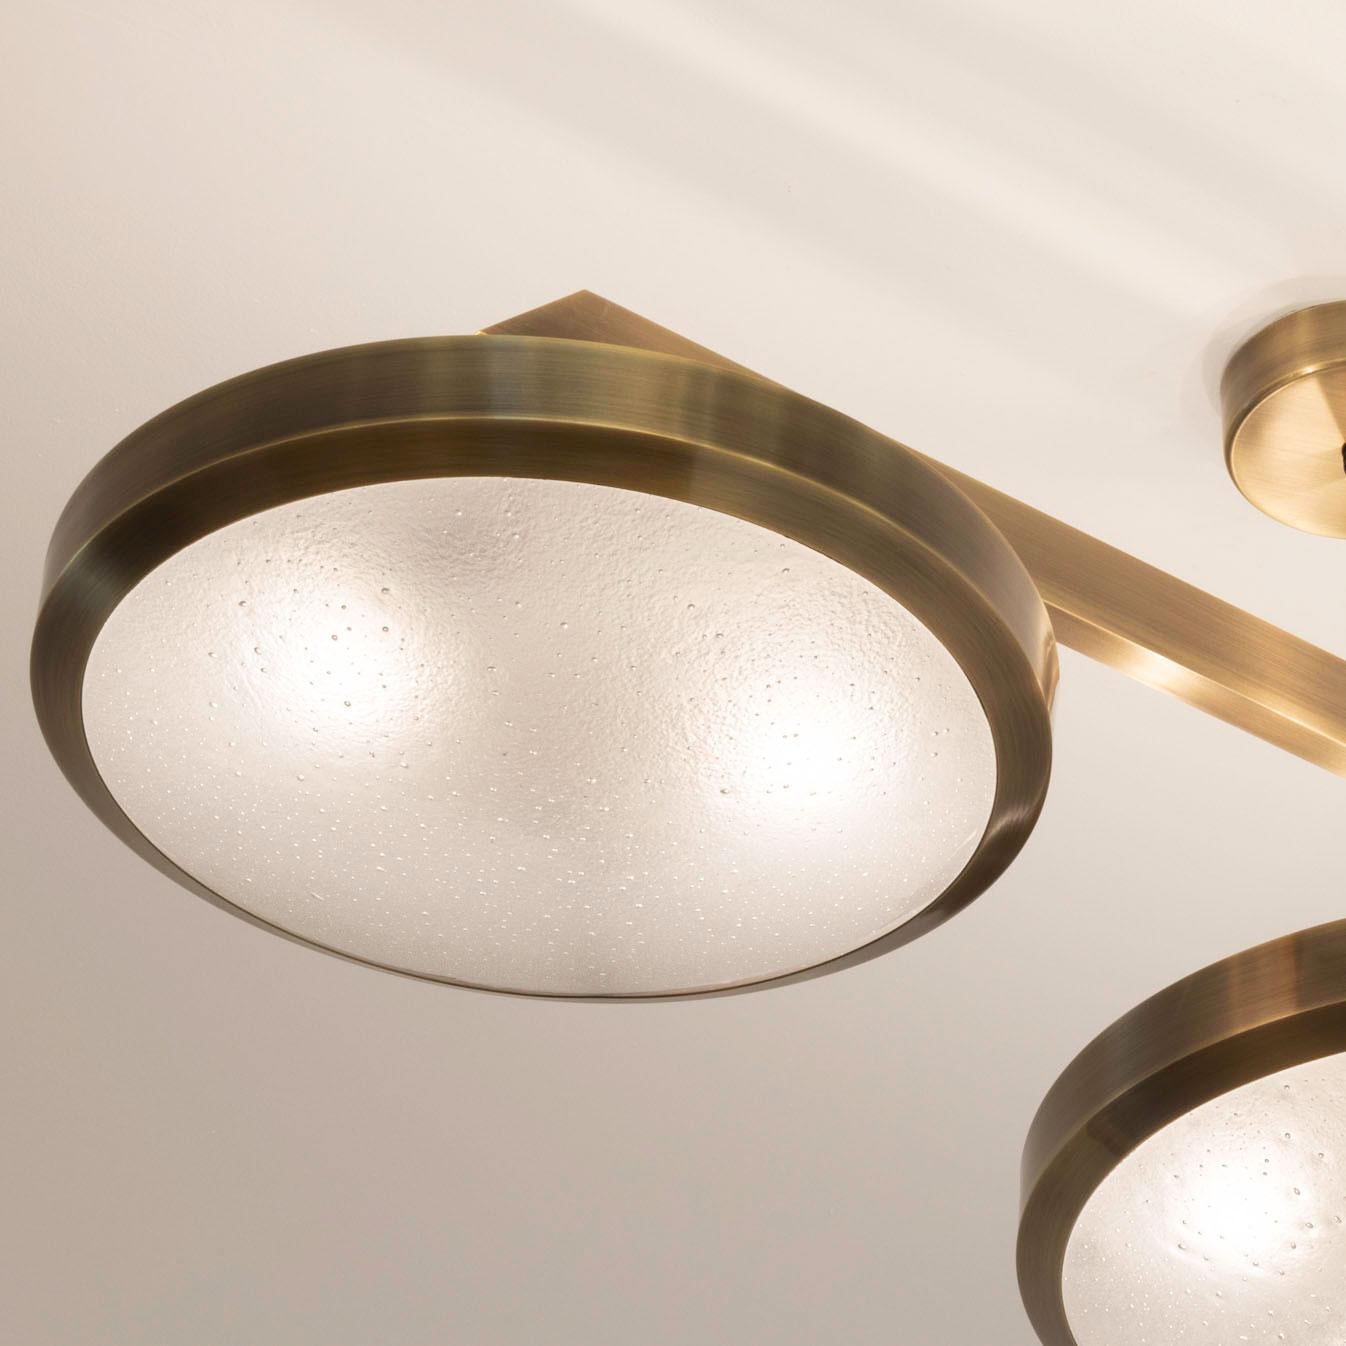 Zeta Ceiling Light by Gaspare Asaro - Polished Brass Finish For Sale 4